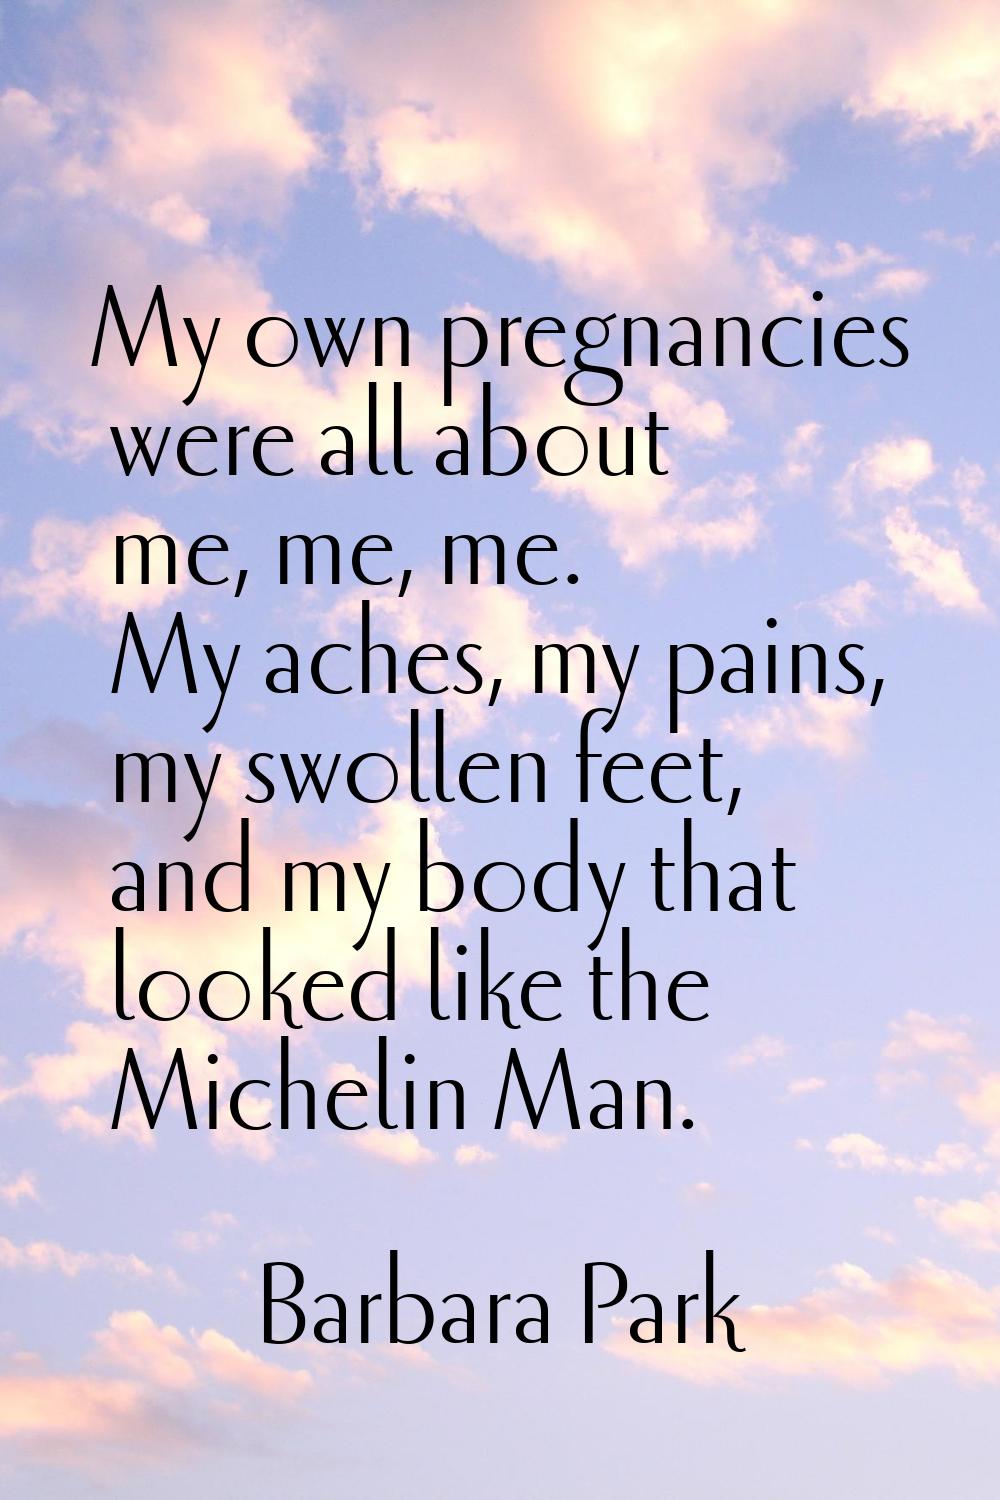 My own pregnancies were all about me, me, me. My aches, my pains, my swollen feet, and my body that